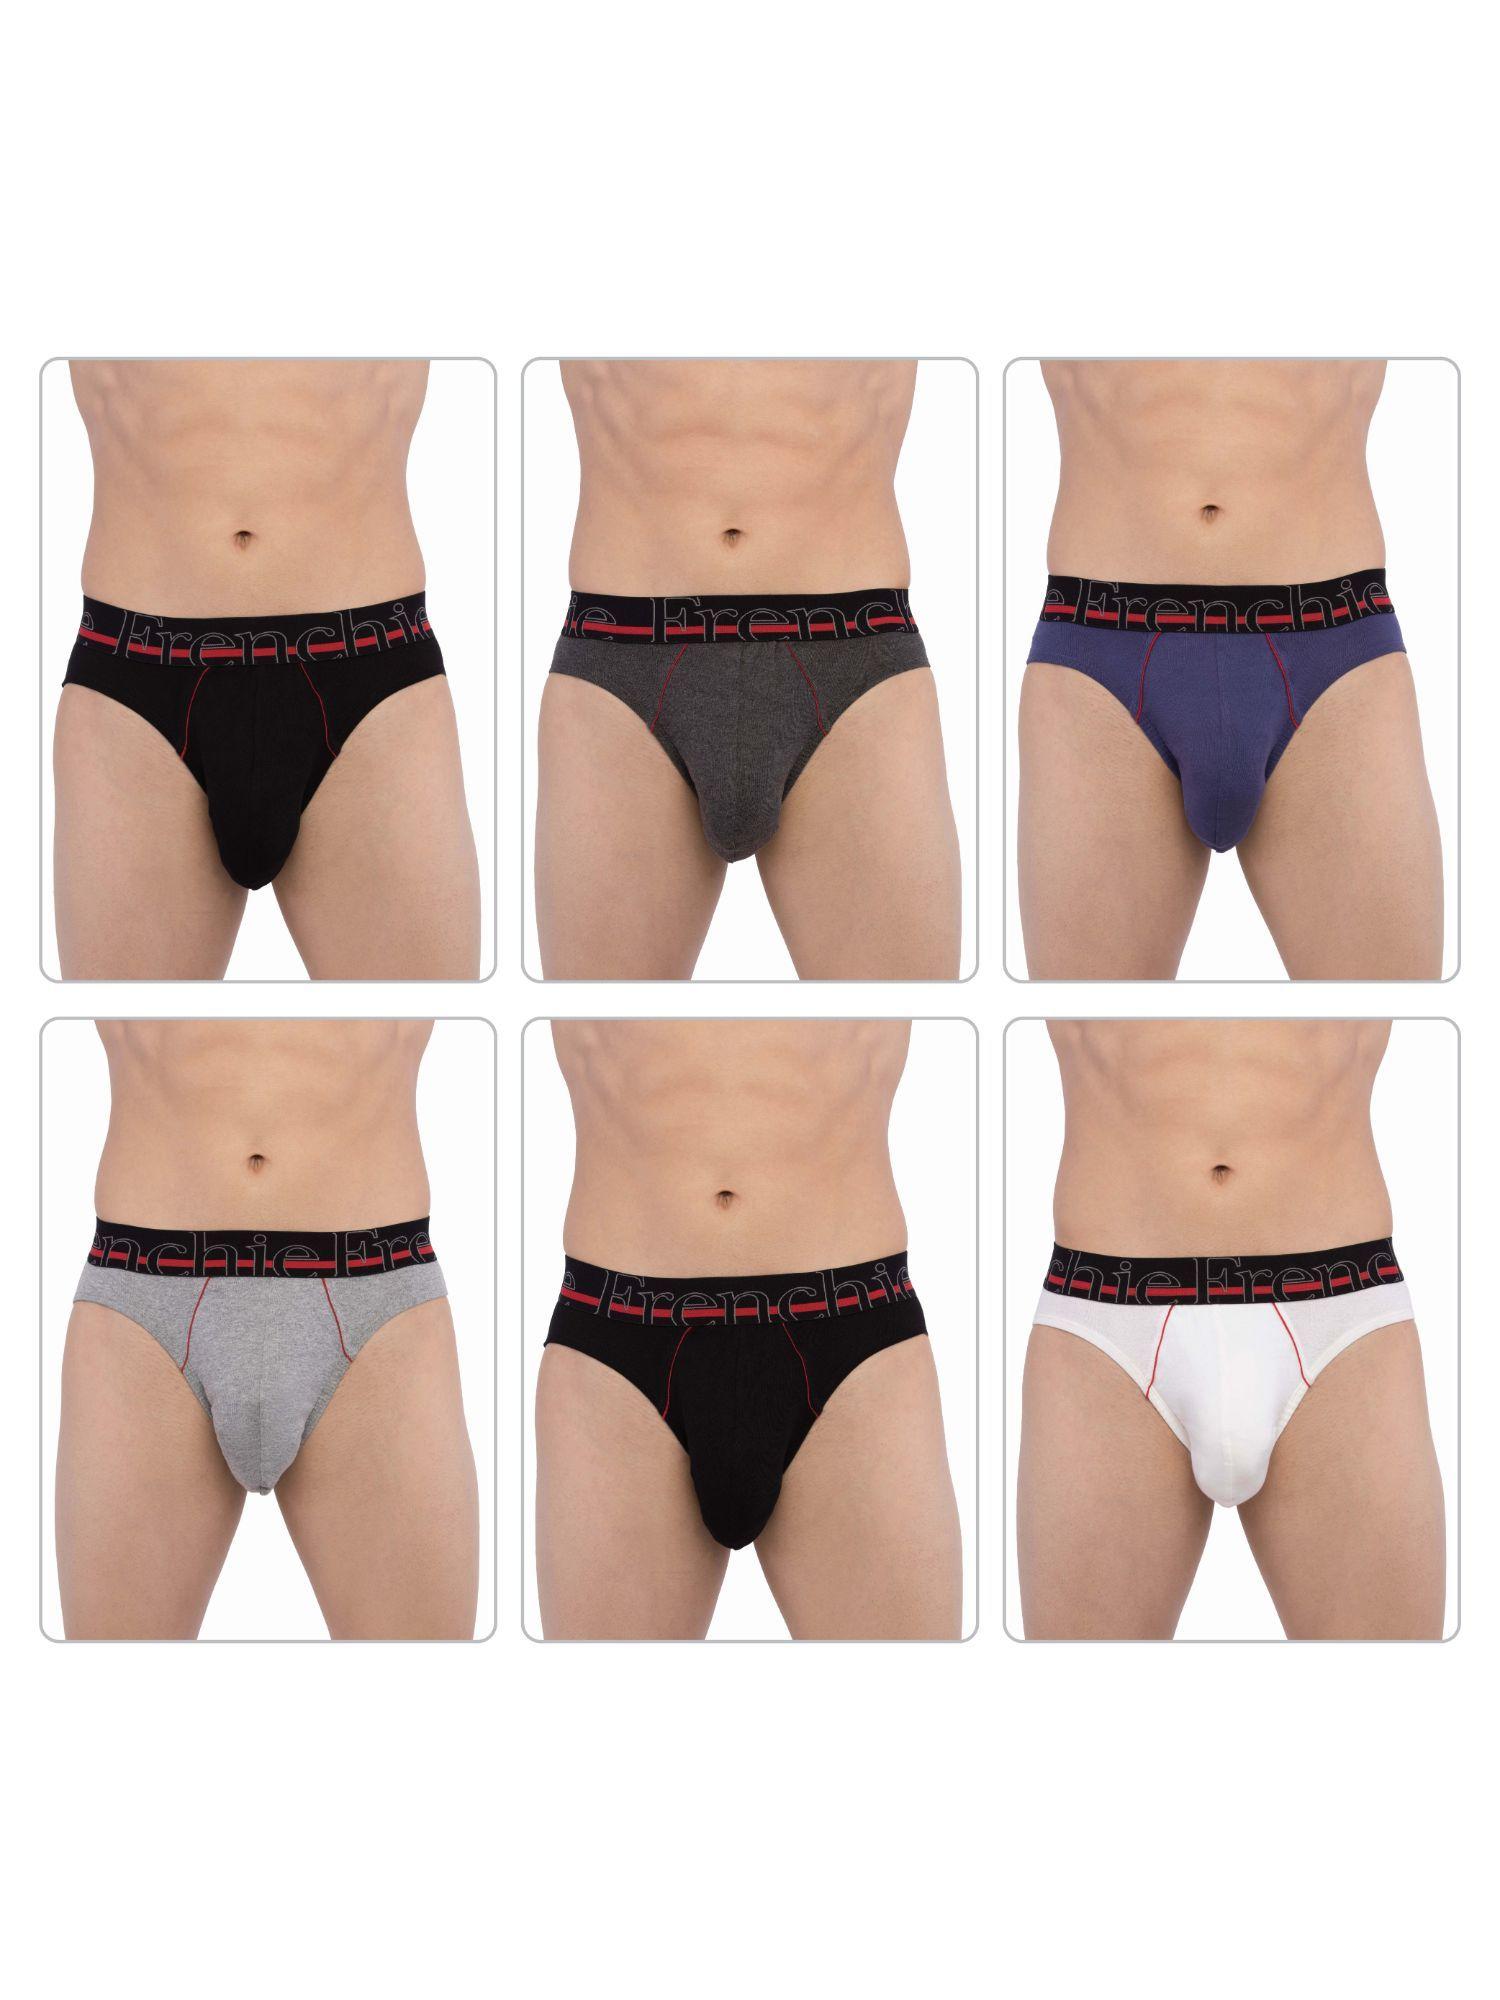 casuals 4002 mens cotton briefs assorted colours (pack of 6)